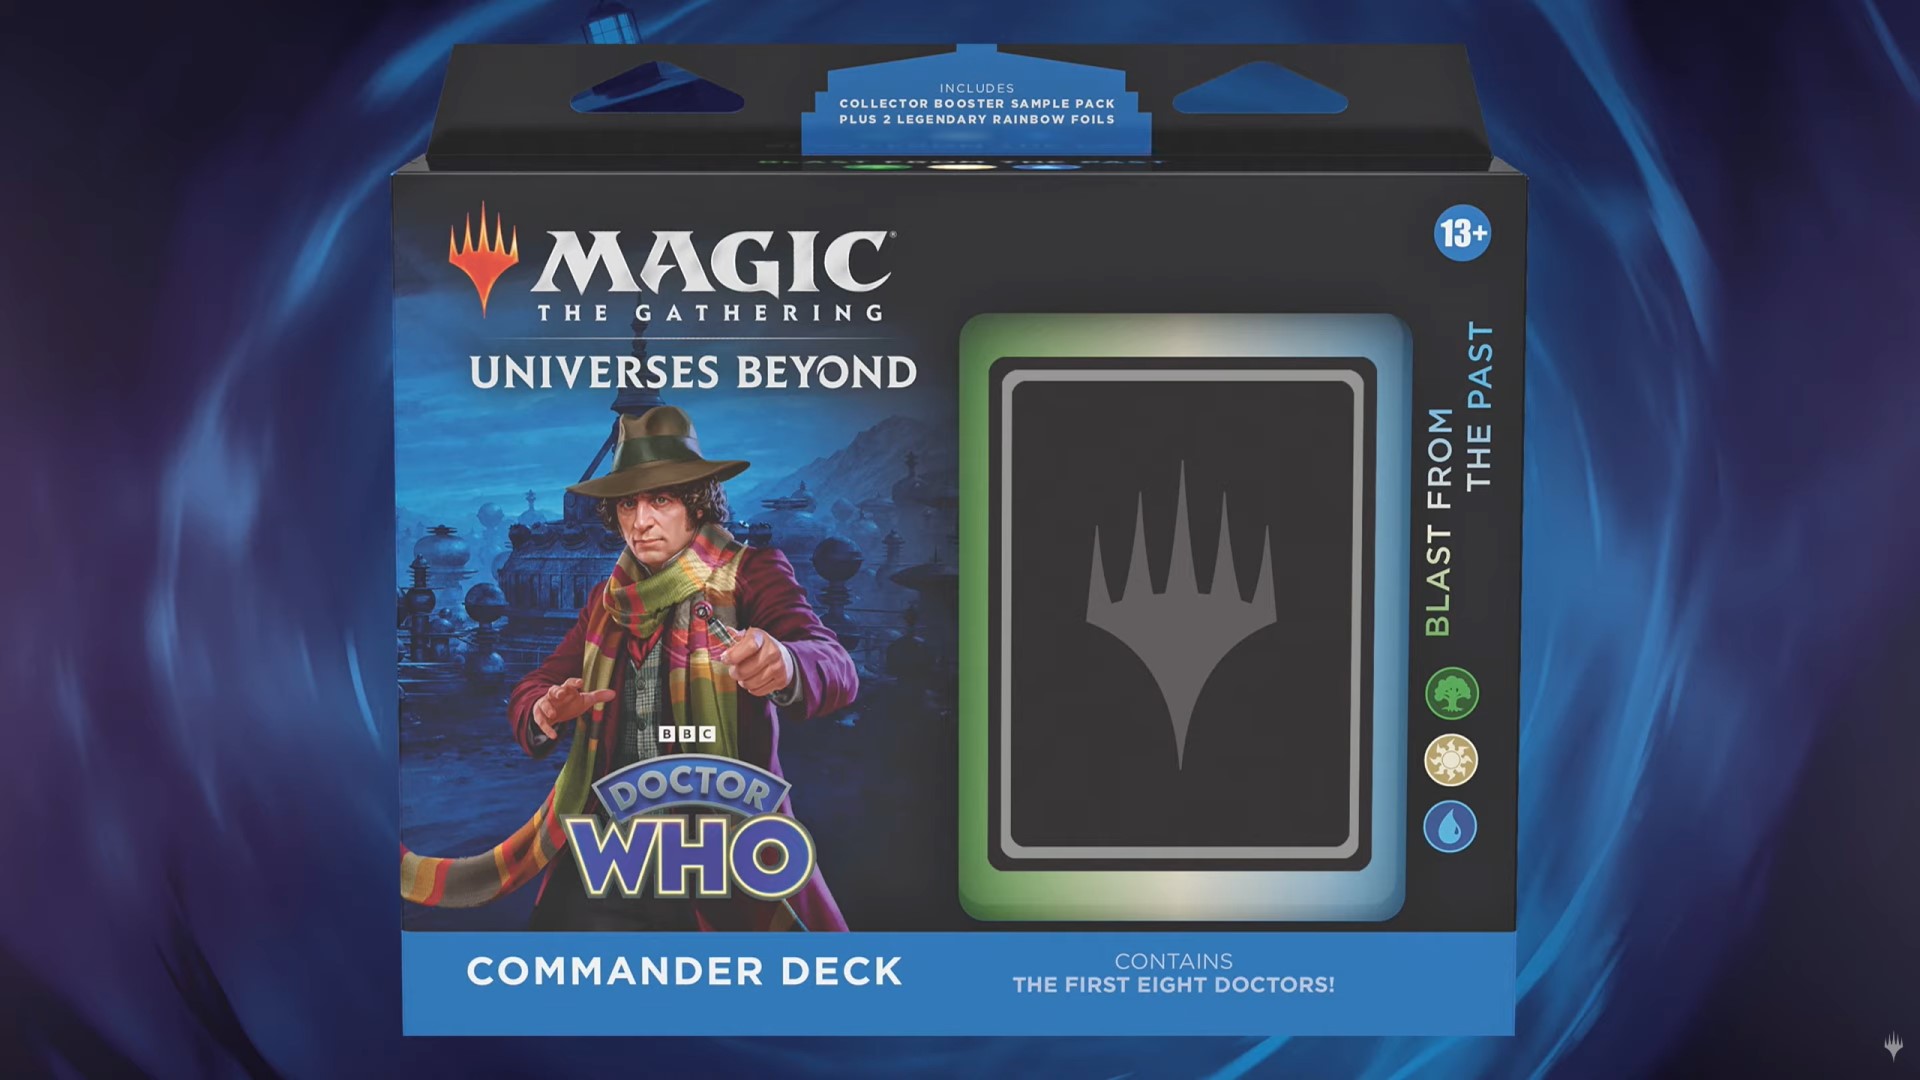 https://www.wargamer.com/wp-content/sites/wargamer/2023/05/mtg-doctor-who-release-date-blast-from-the-past.jpg